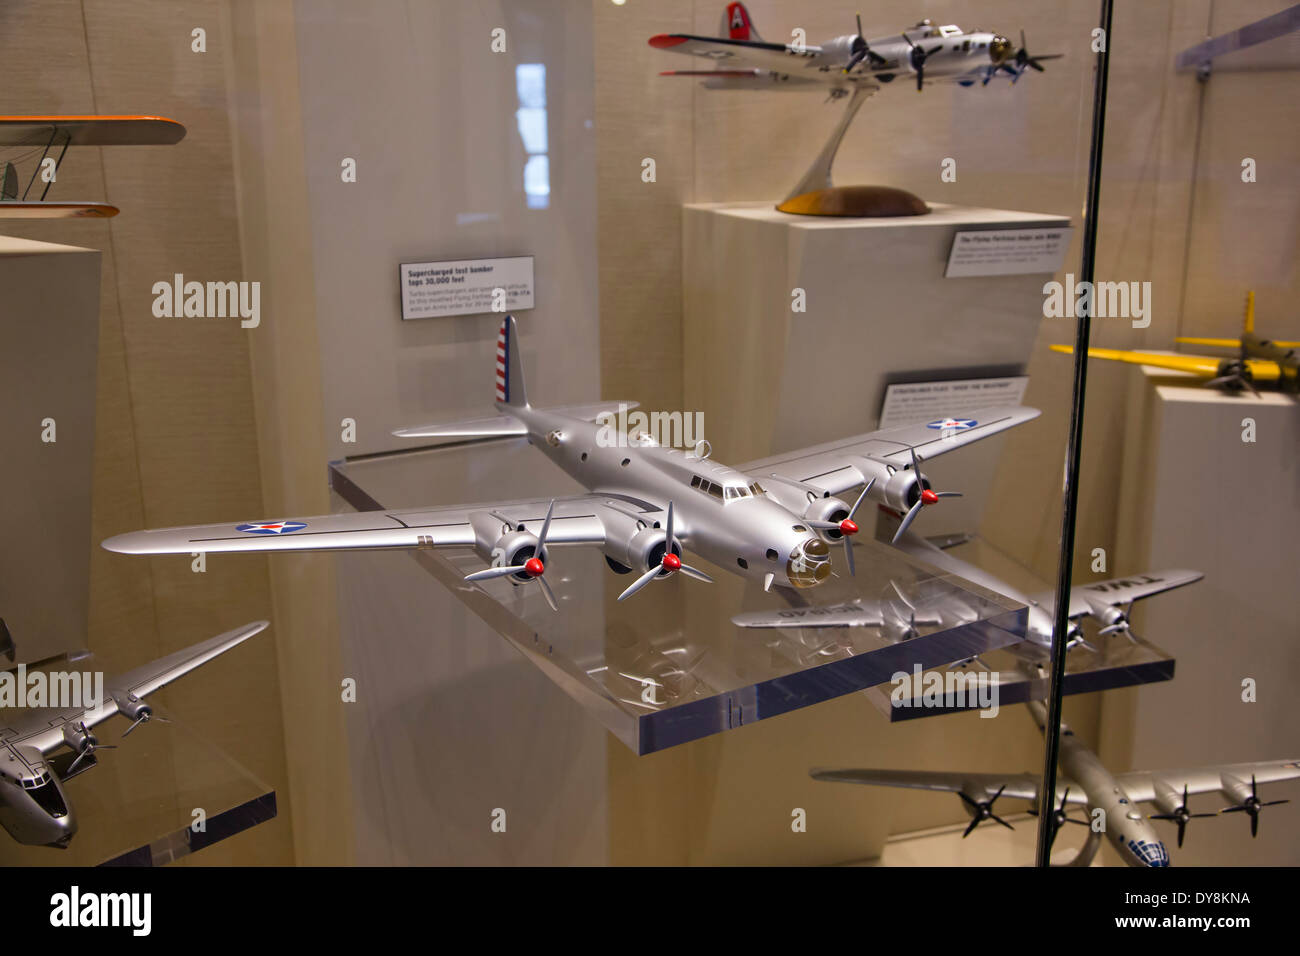 USA, Washington, Seattle, Museum of History and Industry, Boeing Y1B-17A model, supercharged bomber. Stock Photo